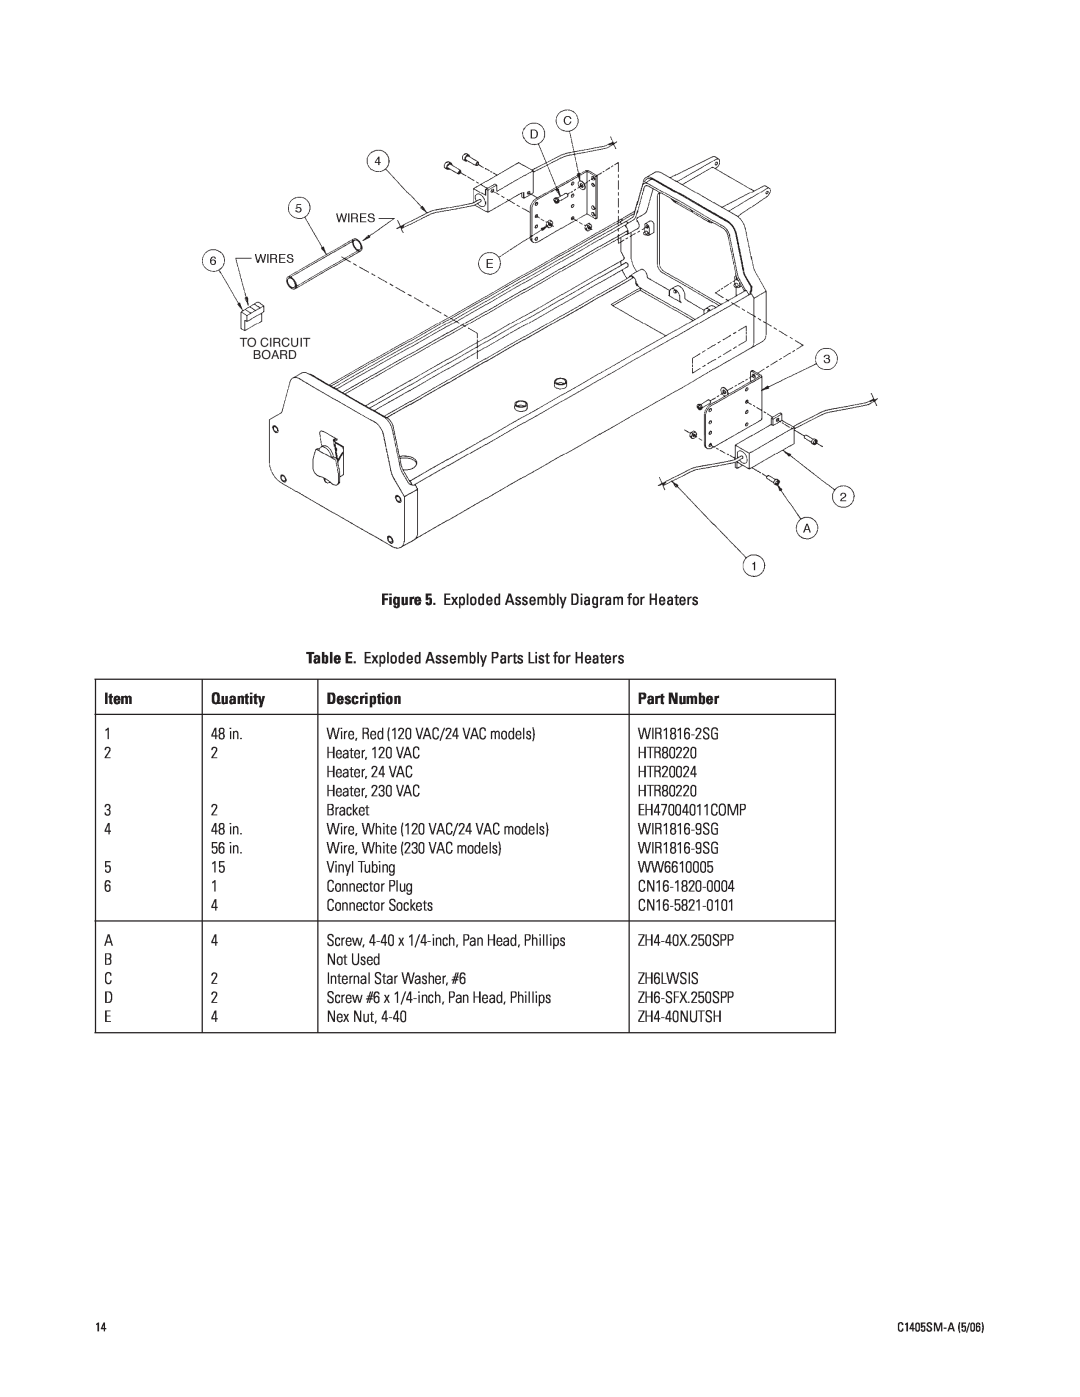 Pelco EH4700 Series manual Exploded Assembly Diagram for Heaters, Quantity, Description, Part Number 